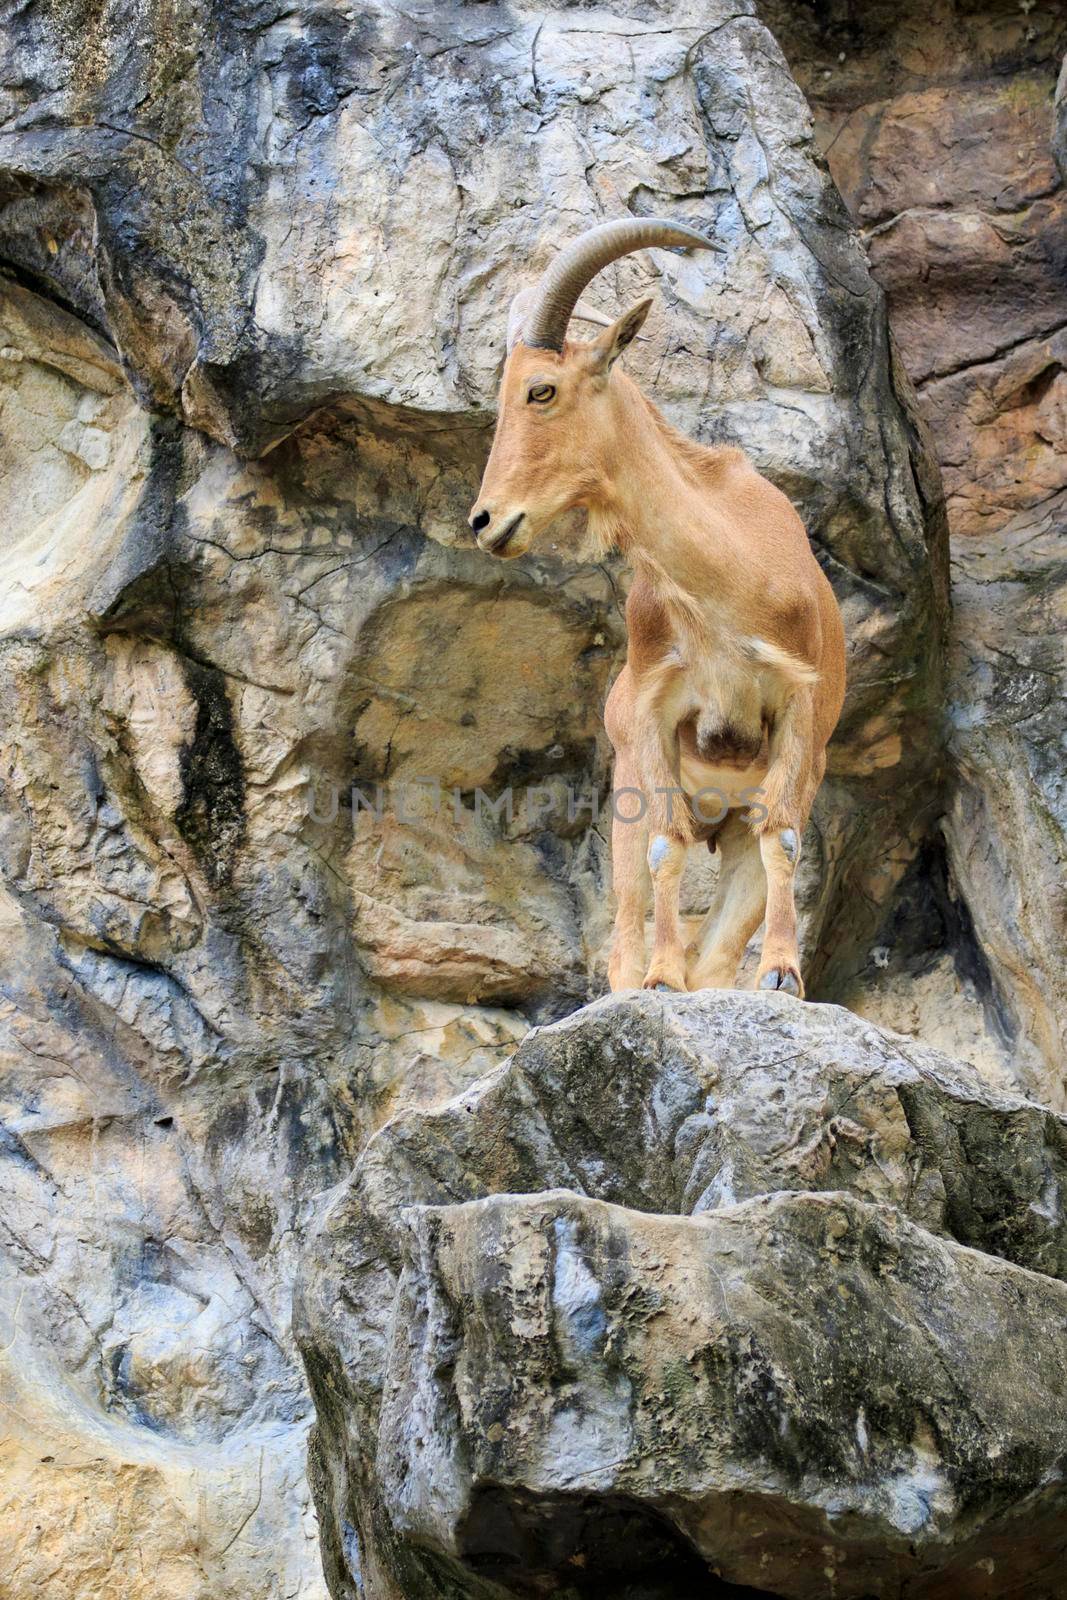 Image of a barbary sheep on the rocks. Wildlife Animals.